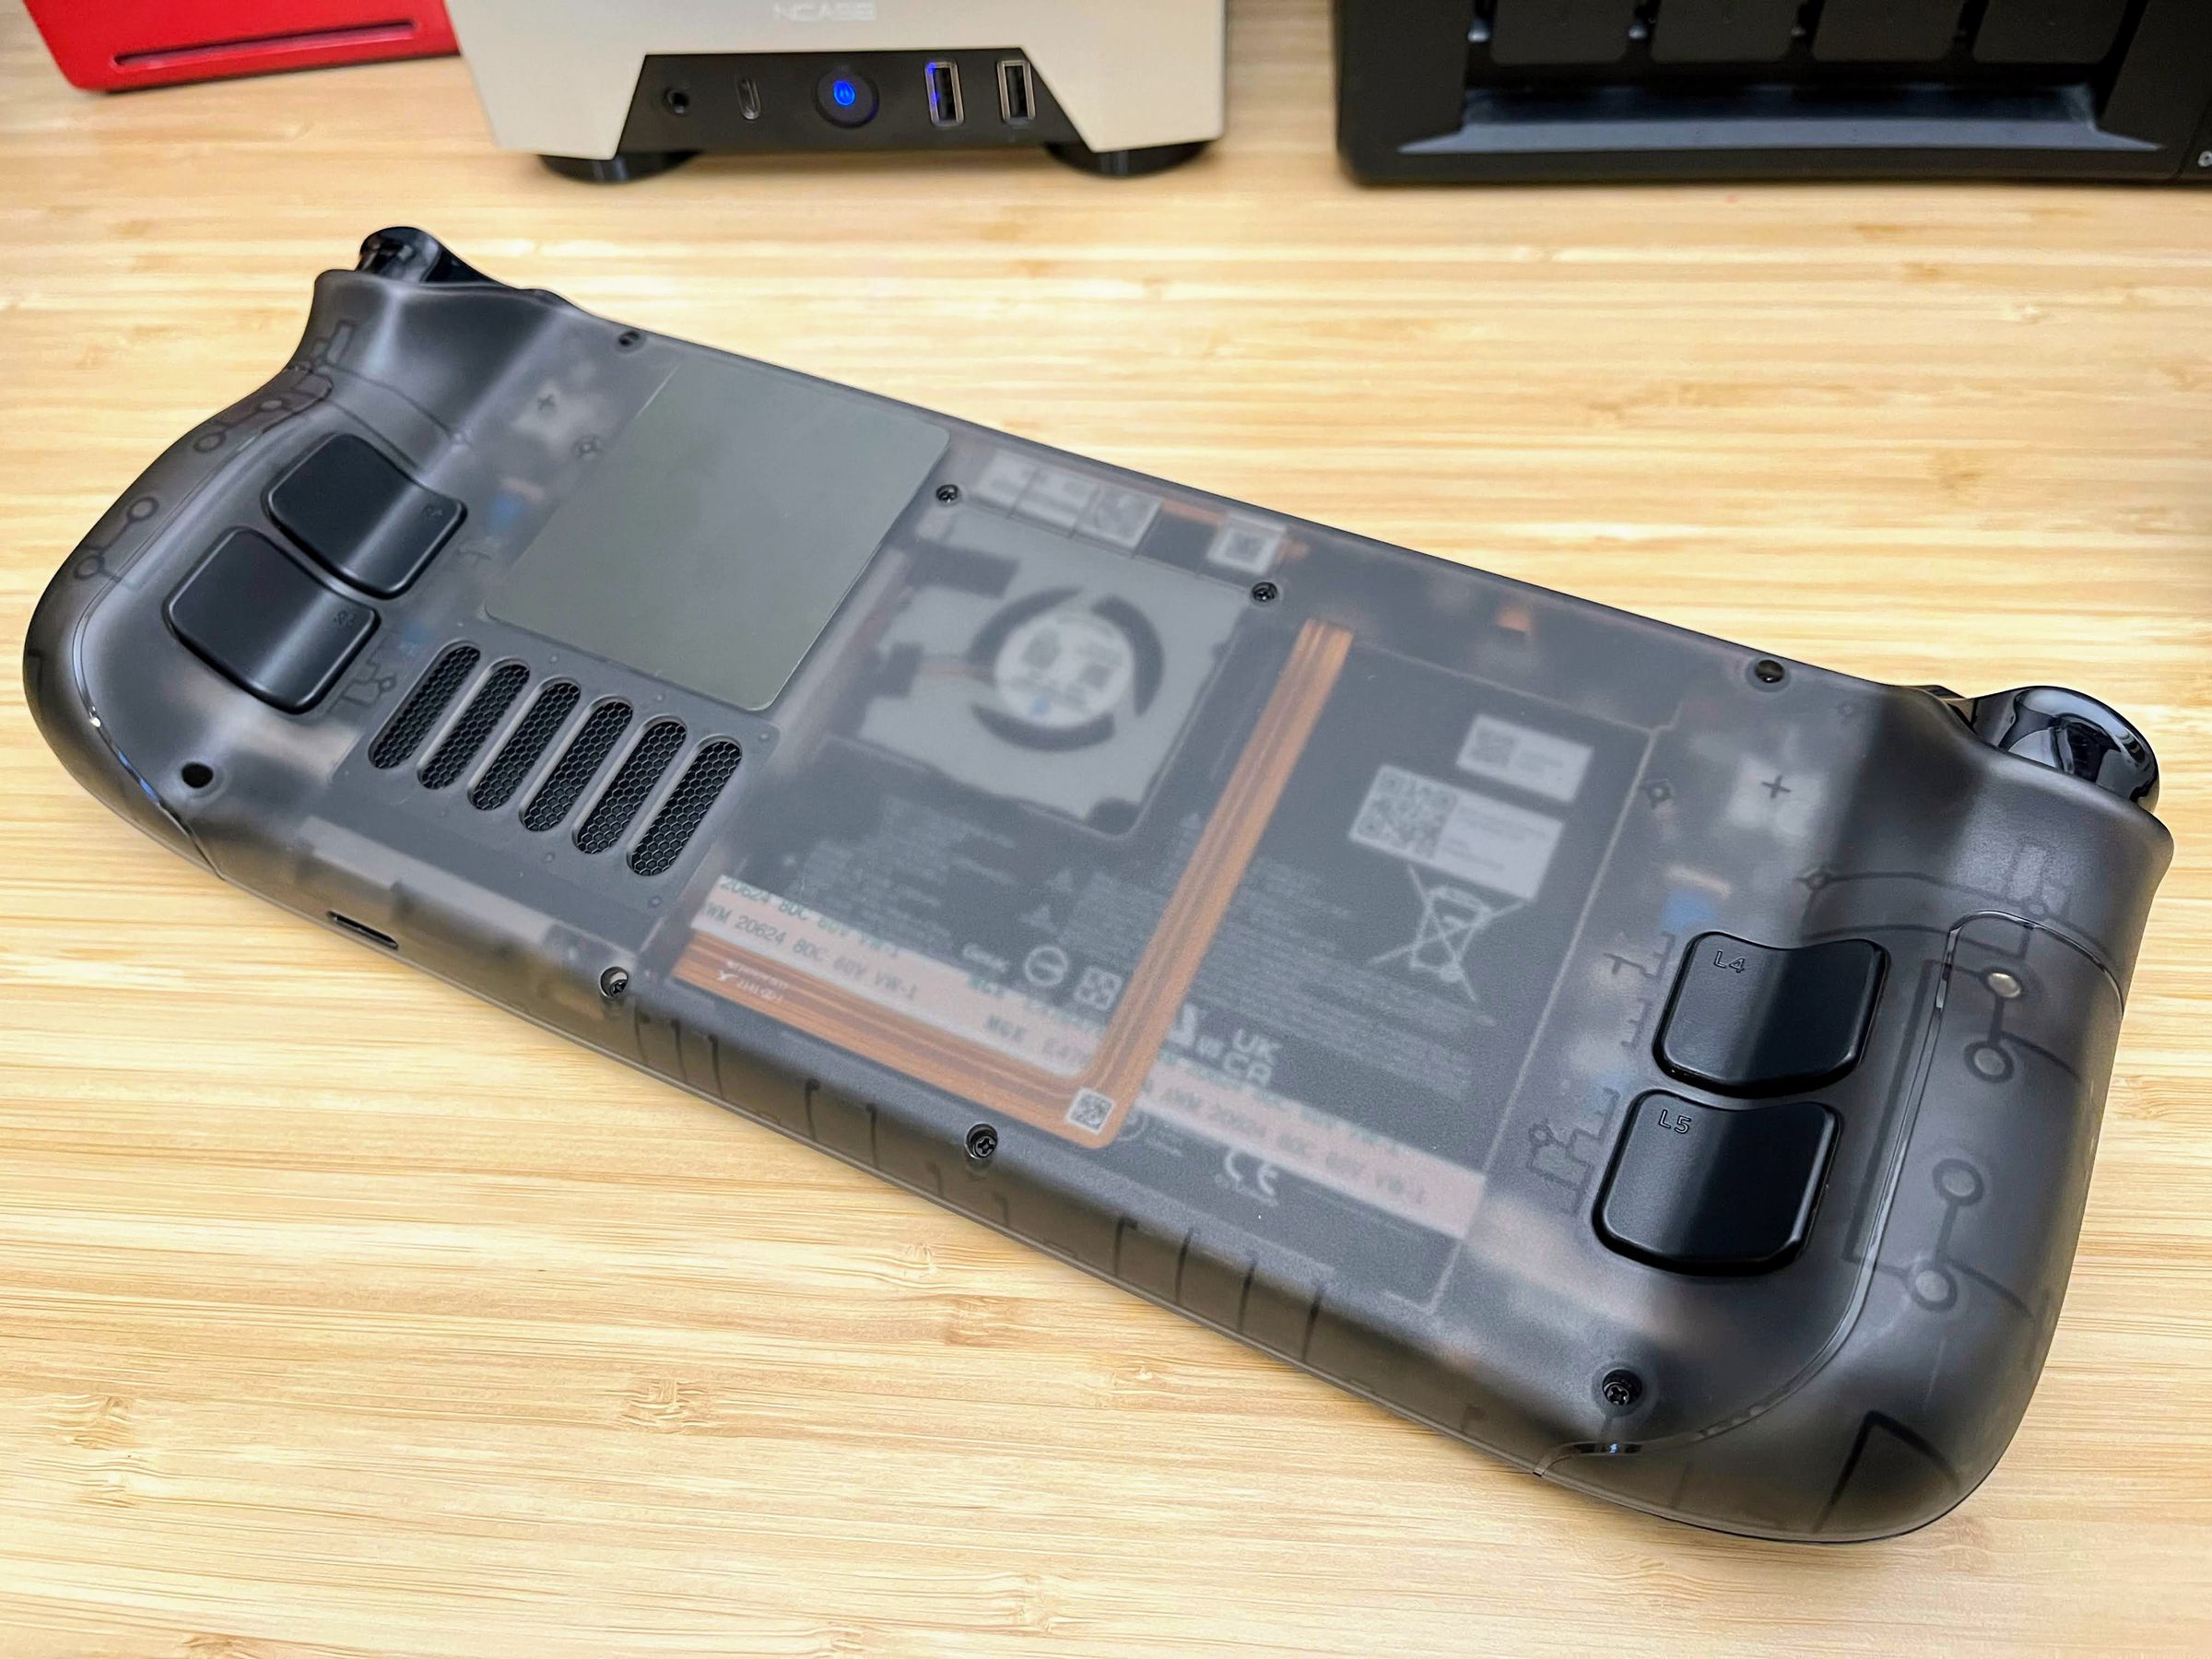 You can see the Steam Deck’s battery and fan through this transparent rear casing.